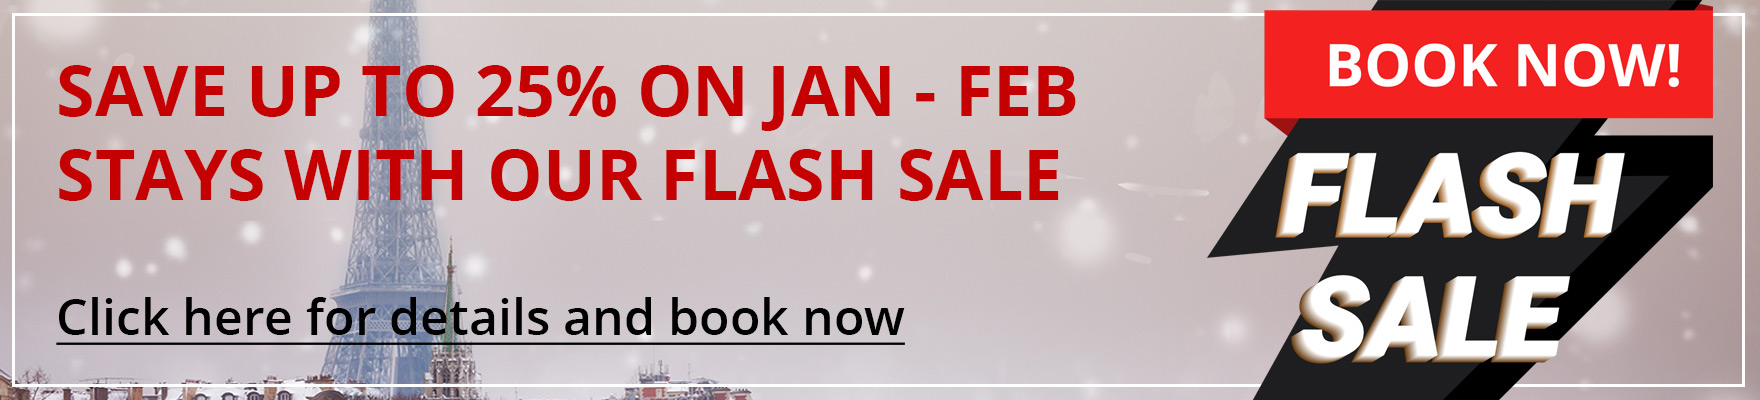 Save Up To 25% With Our Last-Minute Flash Sale